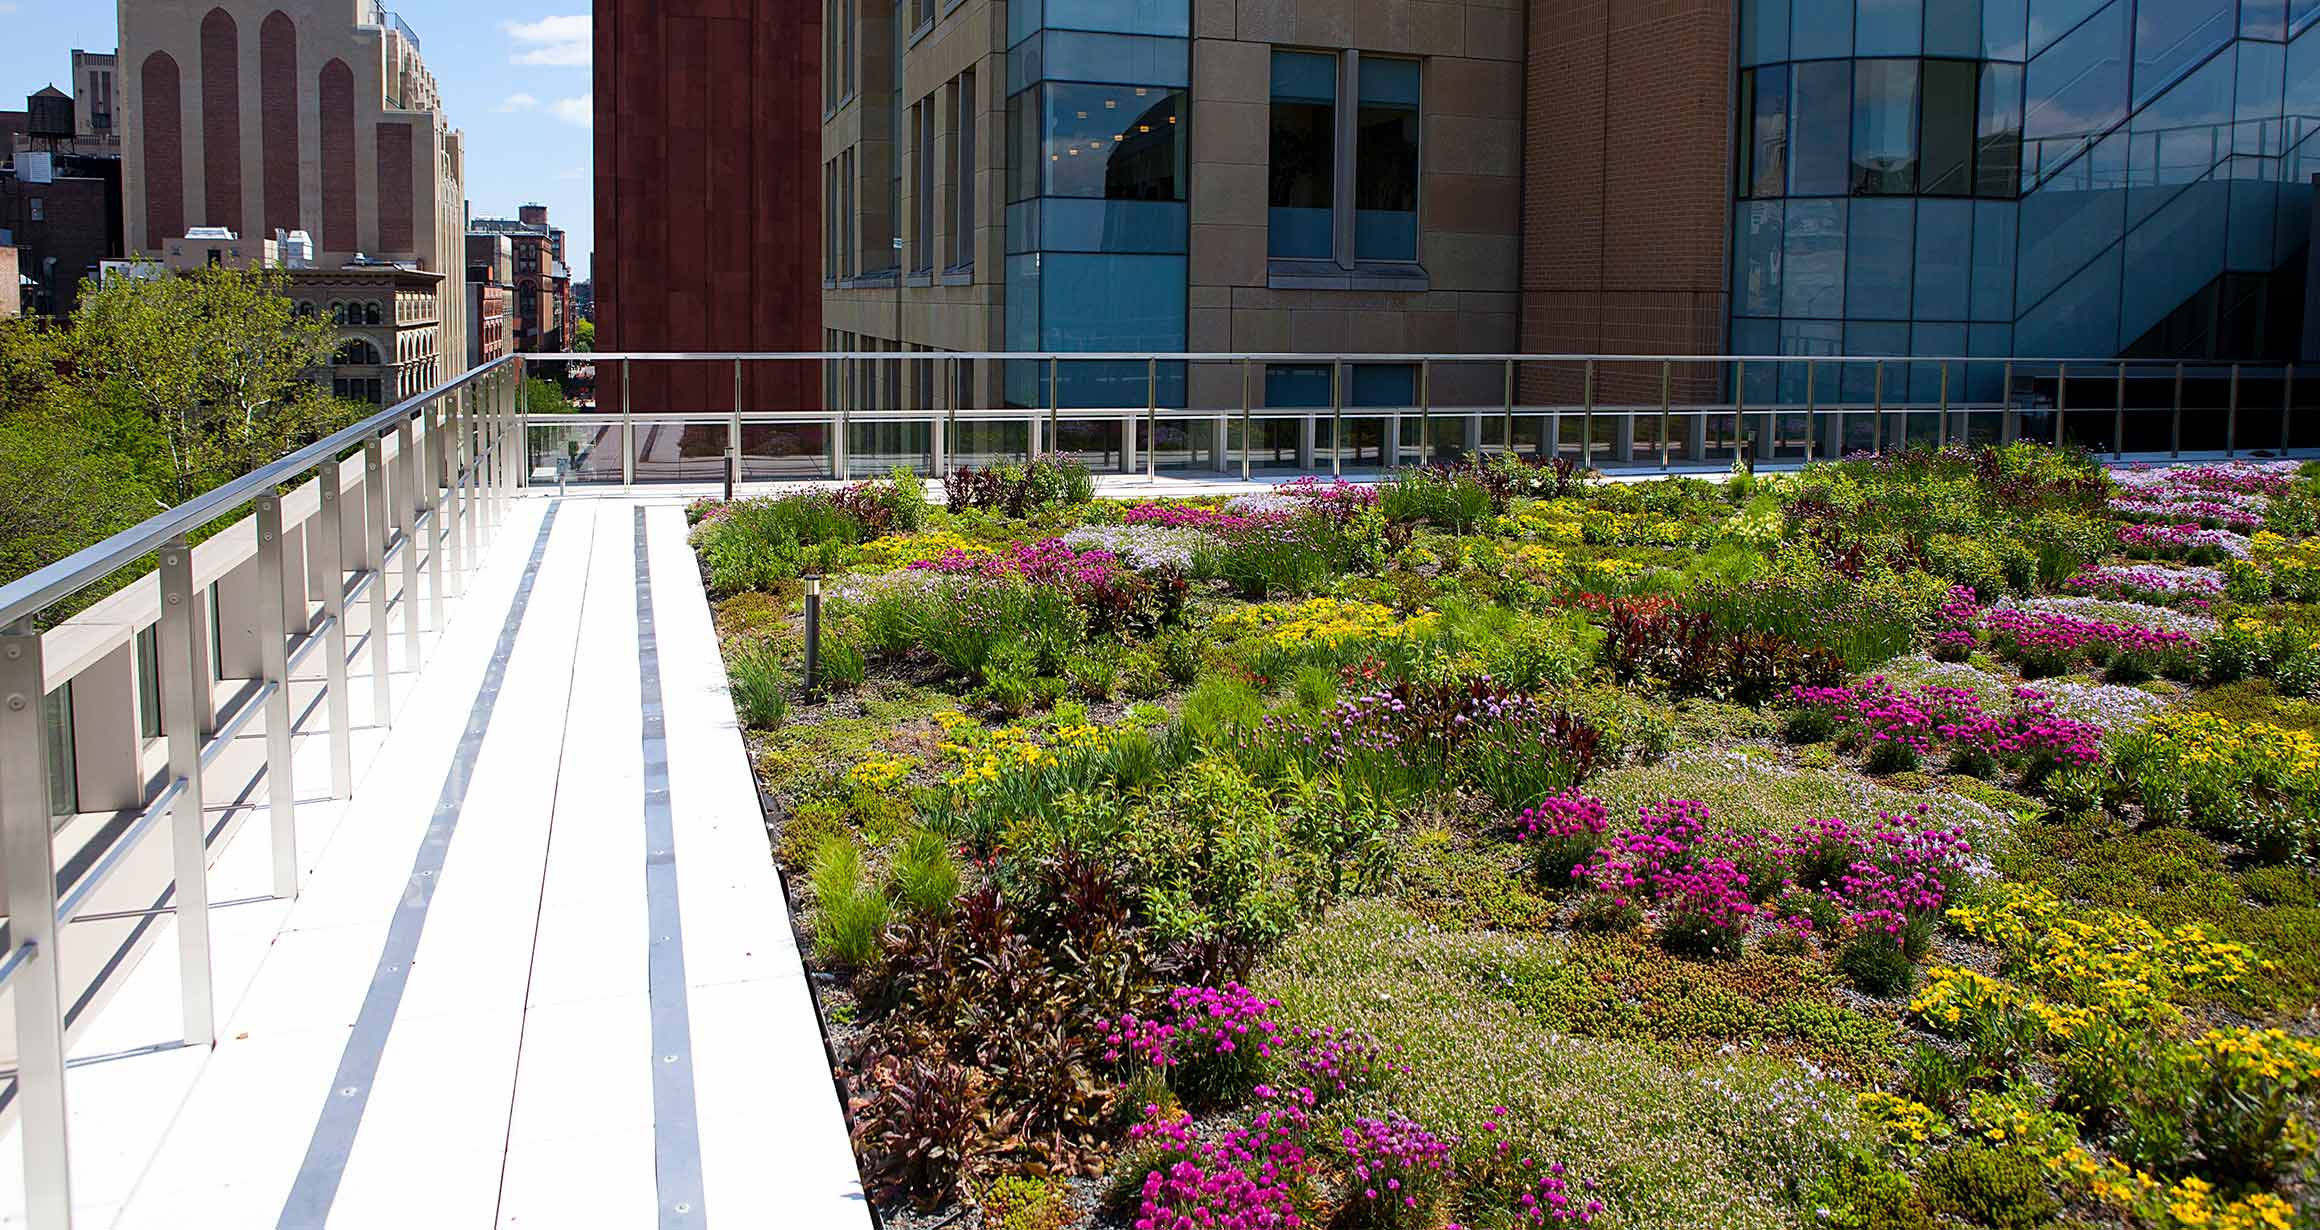 The Green Roof at GCASL is filled with lush green plants